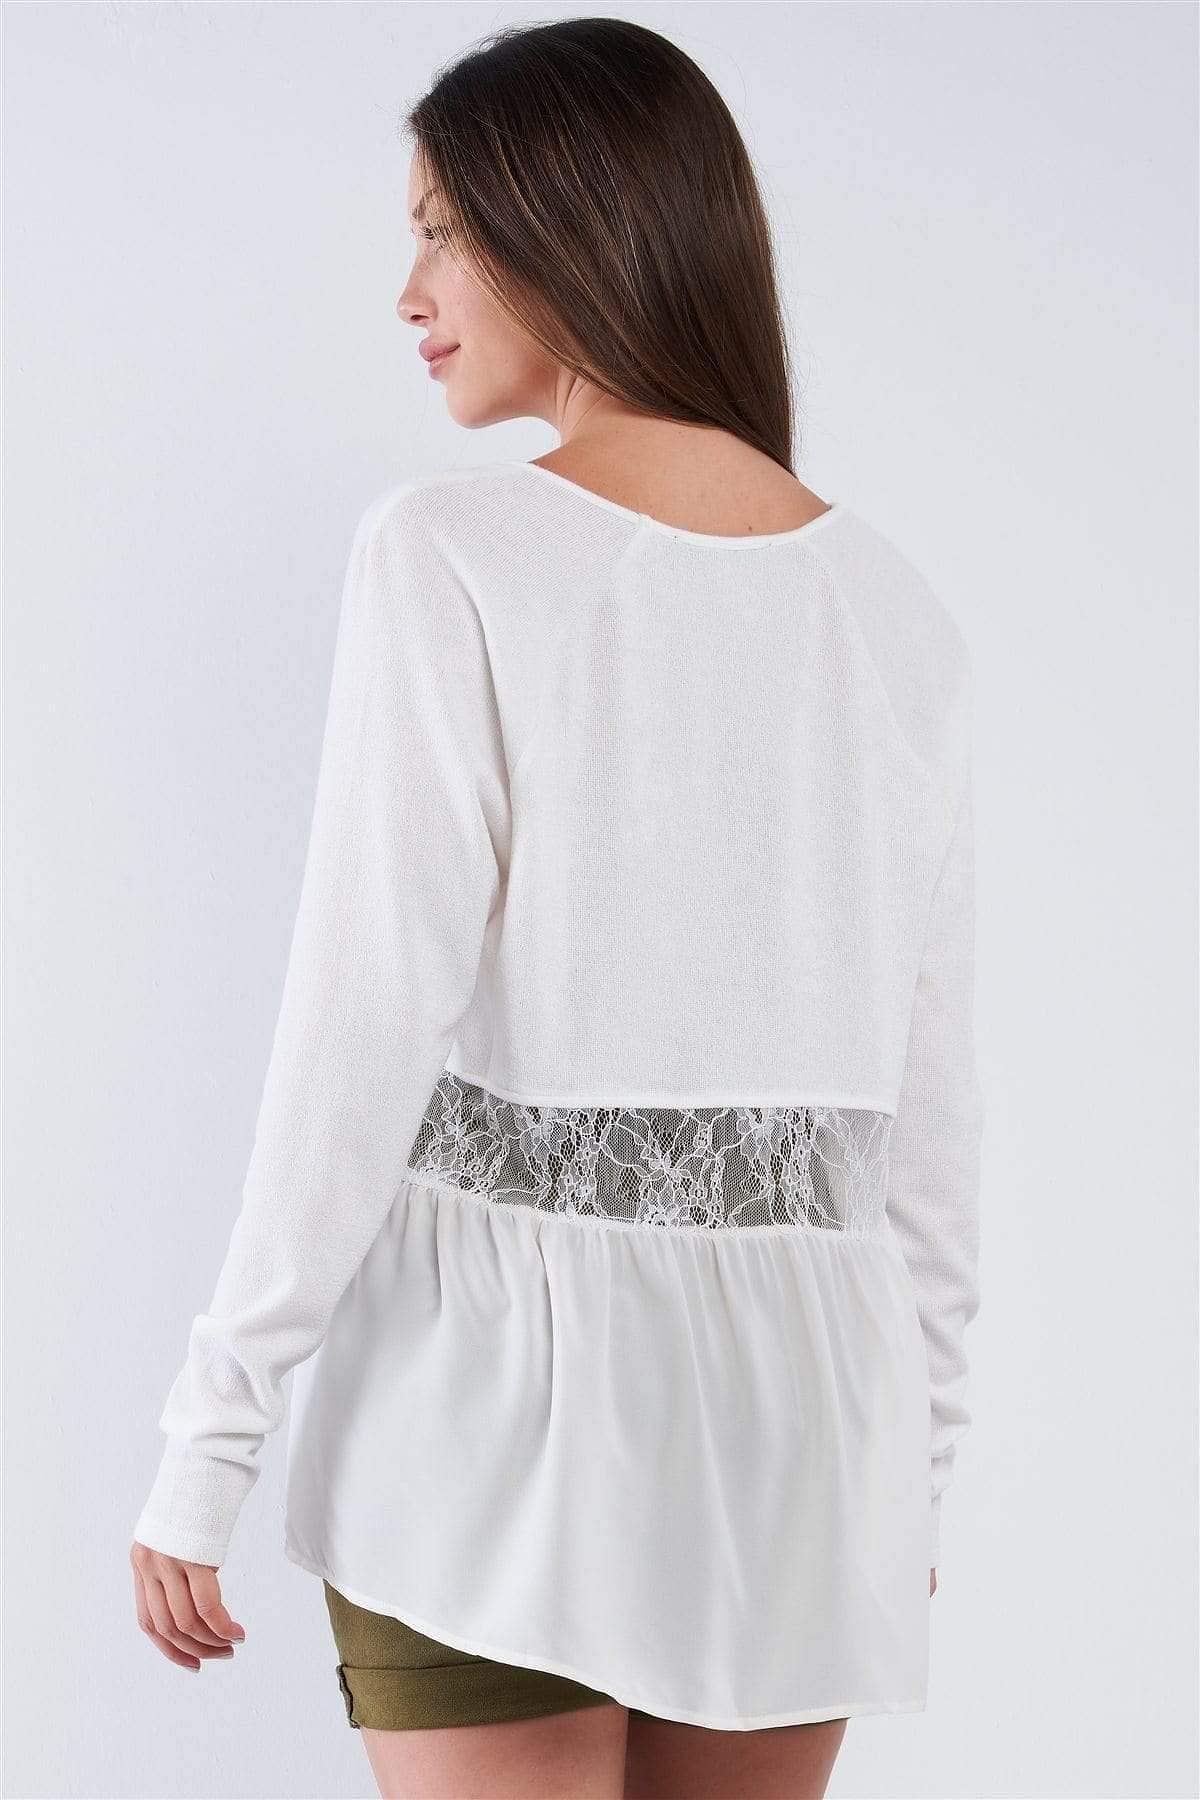 White Long Sleeve V-Neck Pullover Tunic - Shopping Therapy, LLC Shirts & Tops